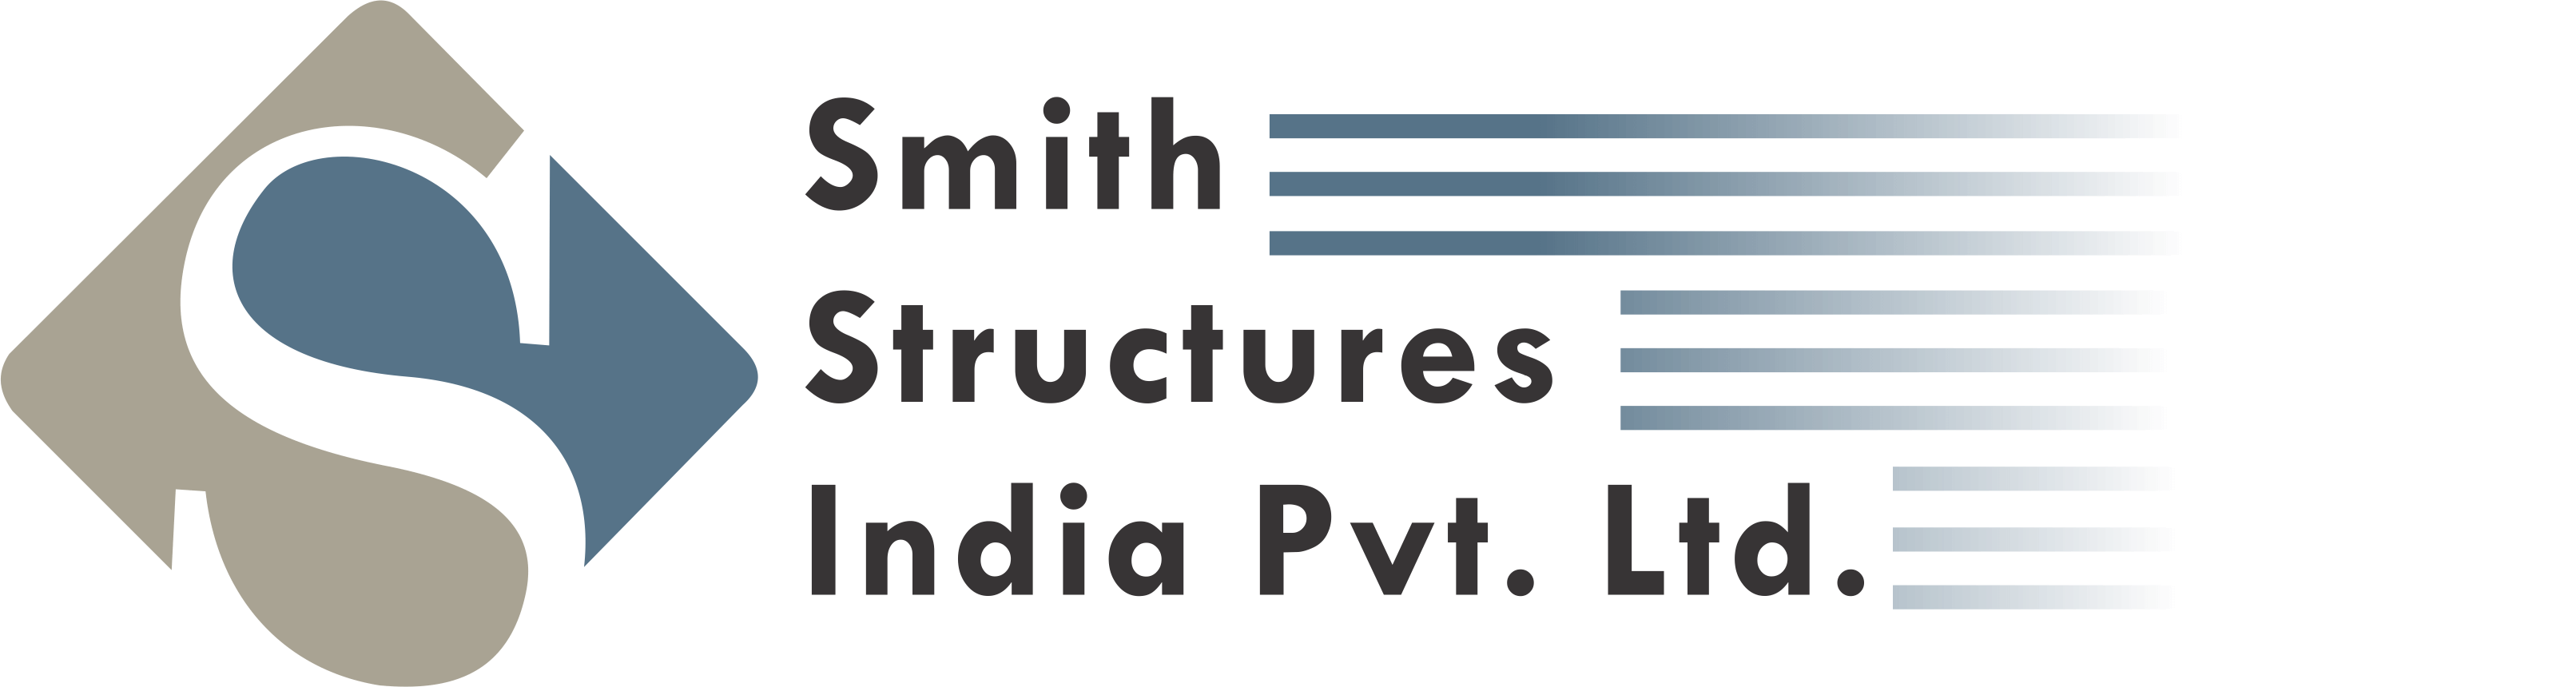 
	Smith Structures (India) Pvt. Ltd.
